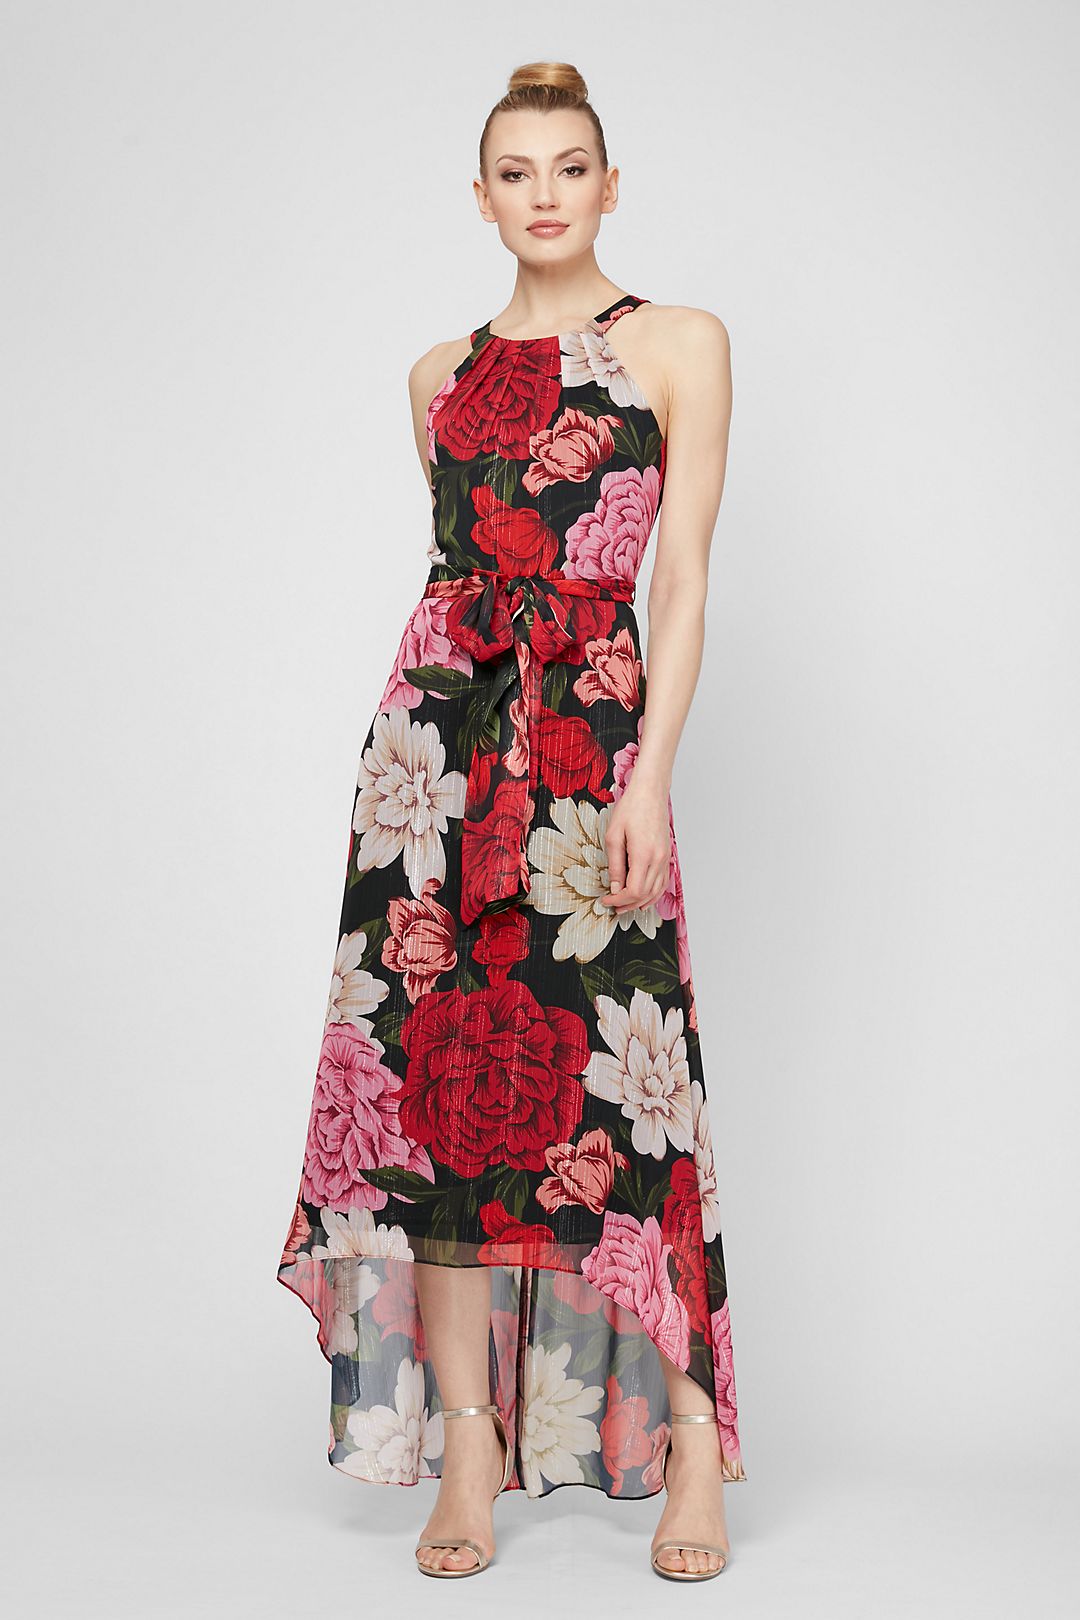 High-Low Floral Chiffon Maxi Dress with Belt Image 1